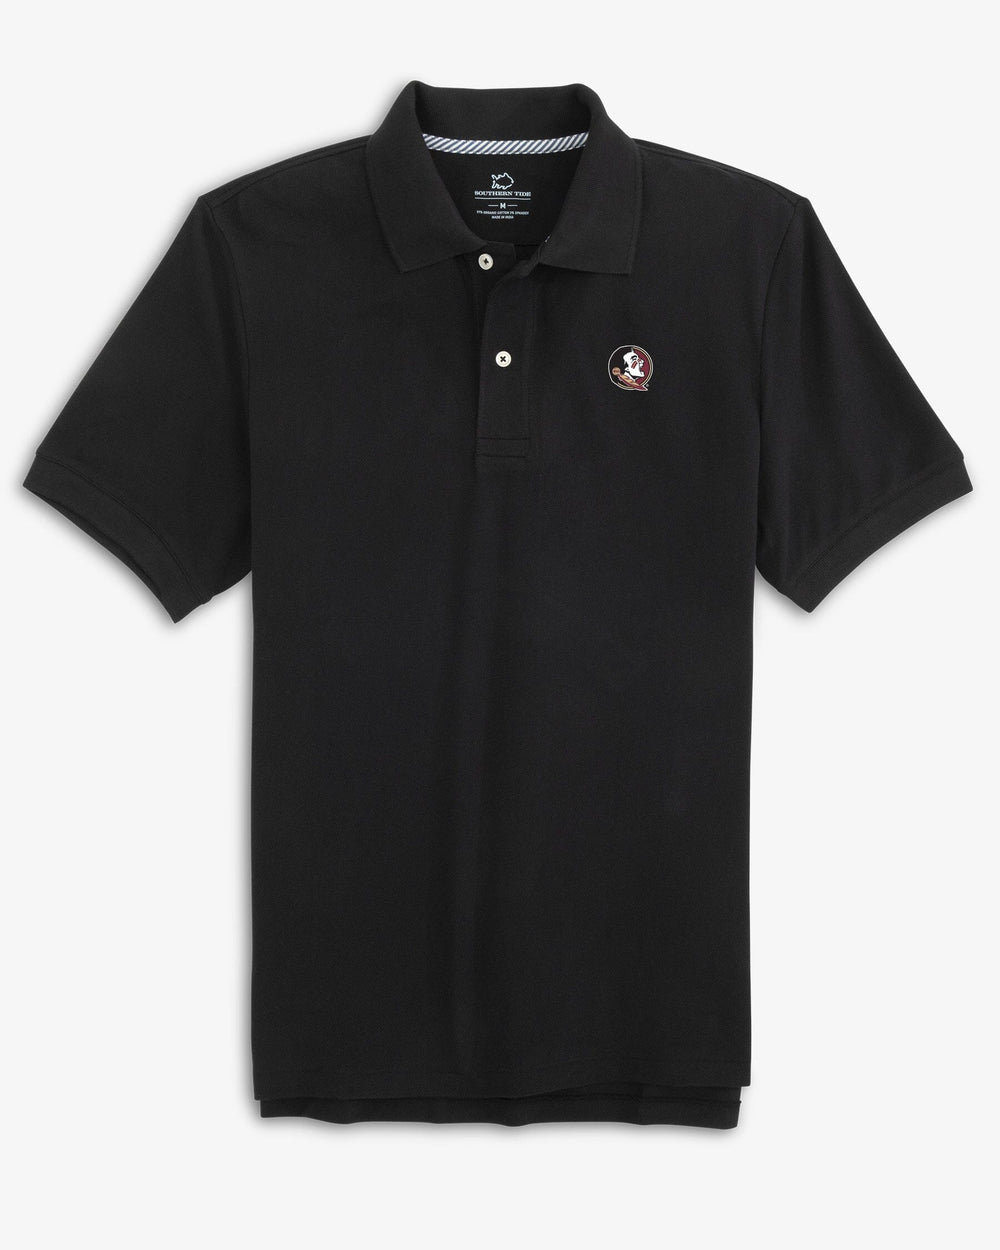 The front view of the FSU Seminoles Skipjack Polo by Southern Tide - Black